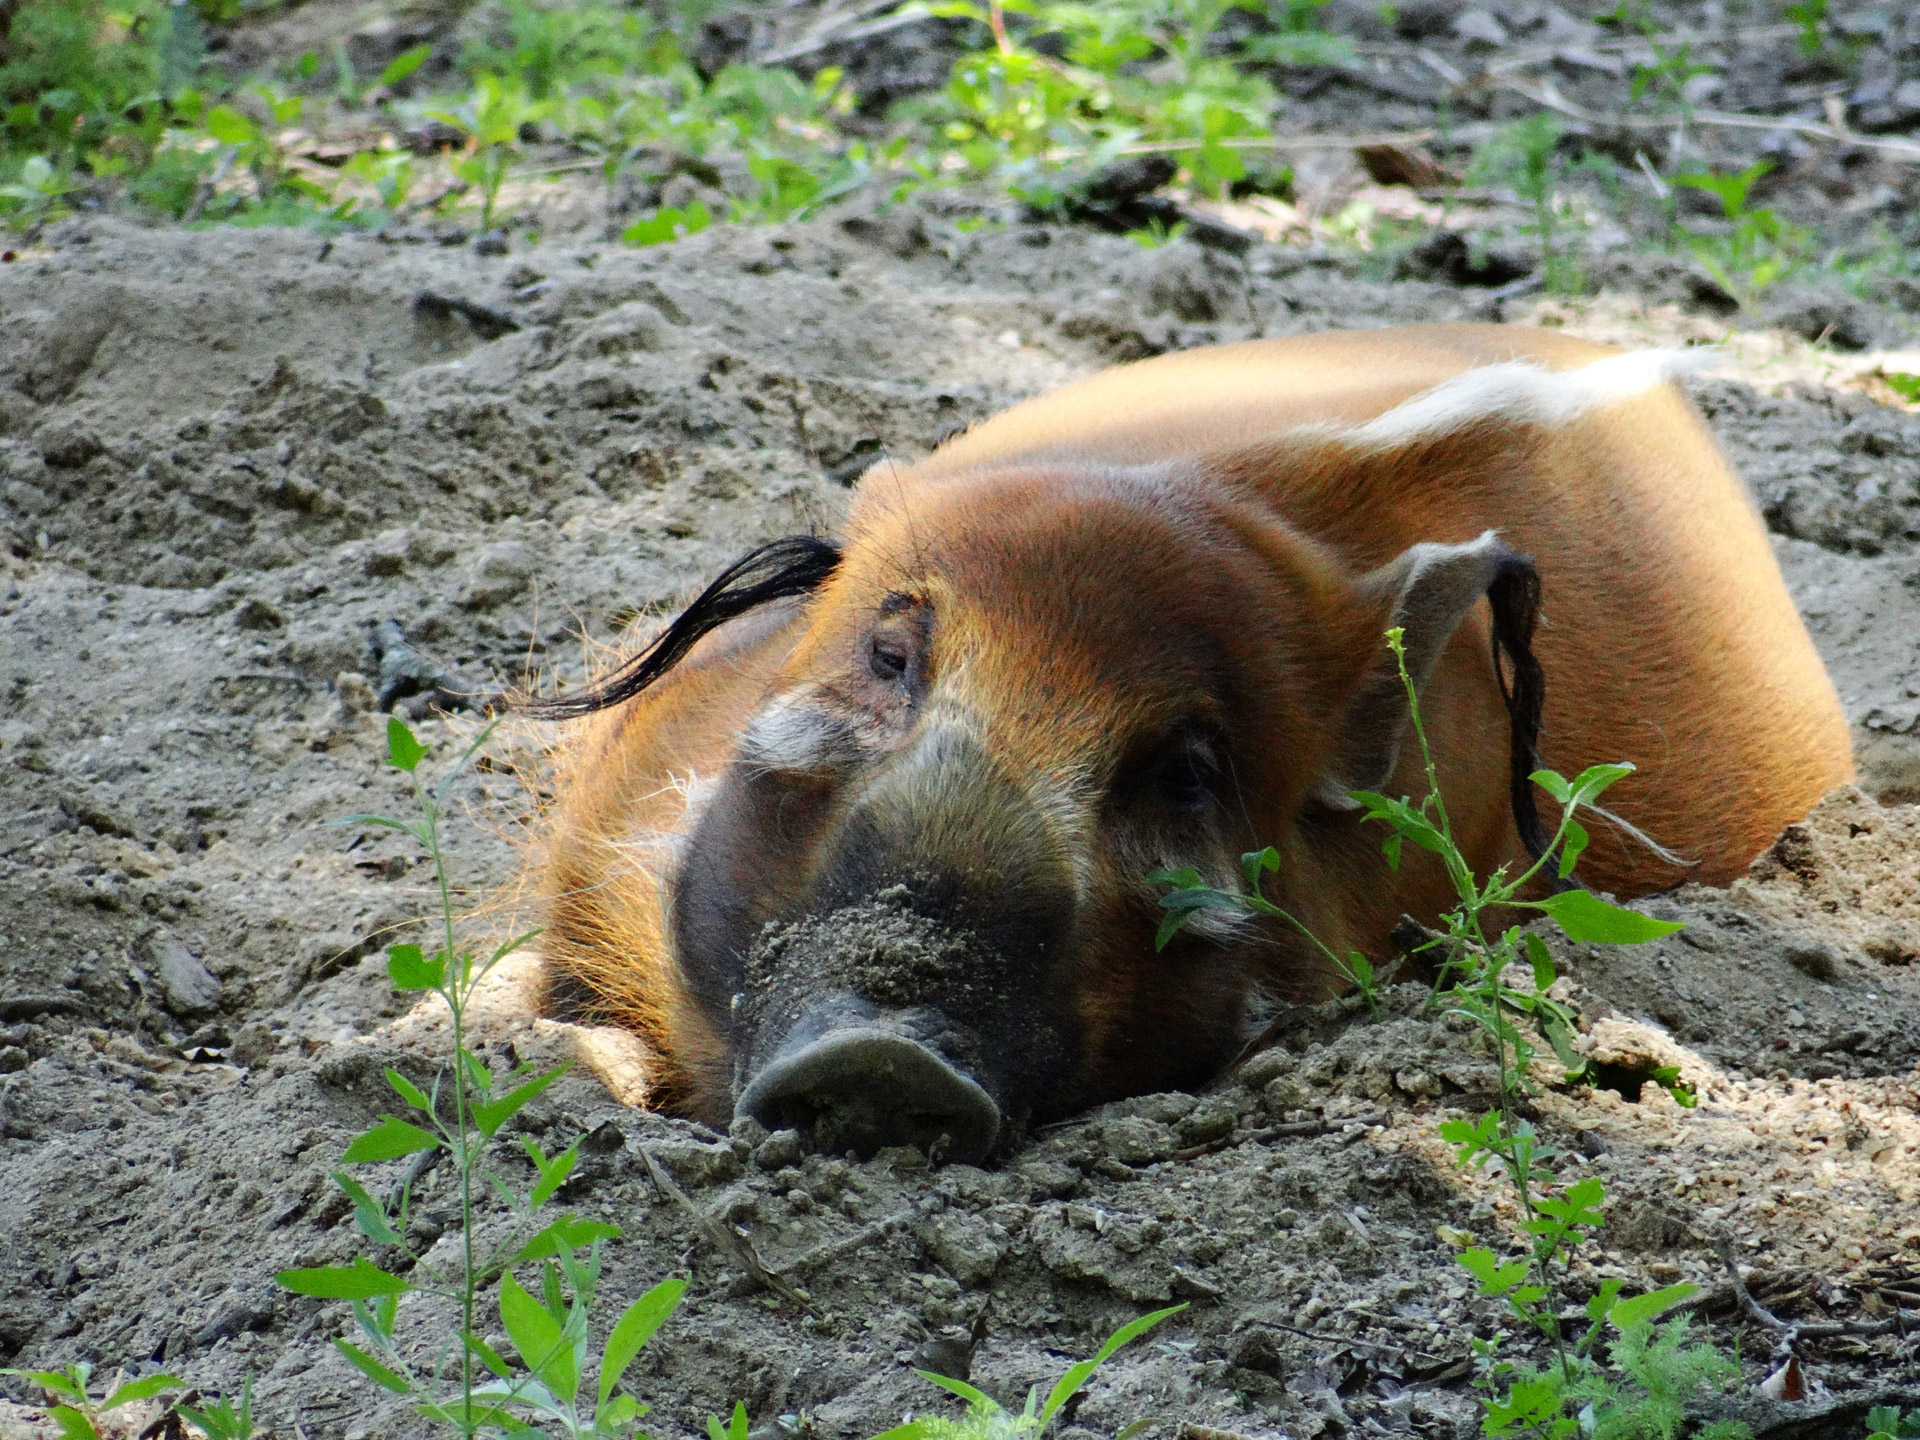 The Red River Hog is a pig family member that lives in Africa and Madagascar in the rainforests, mountains and brushes.